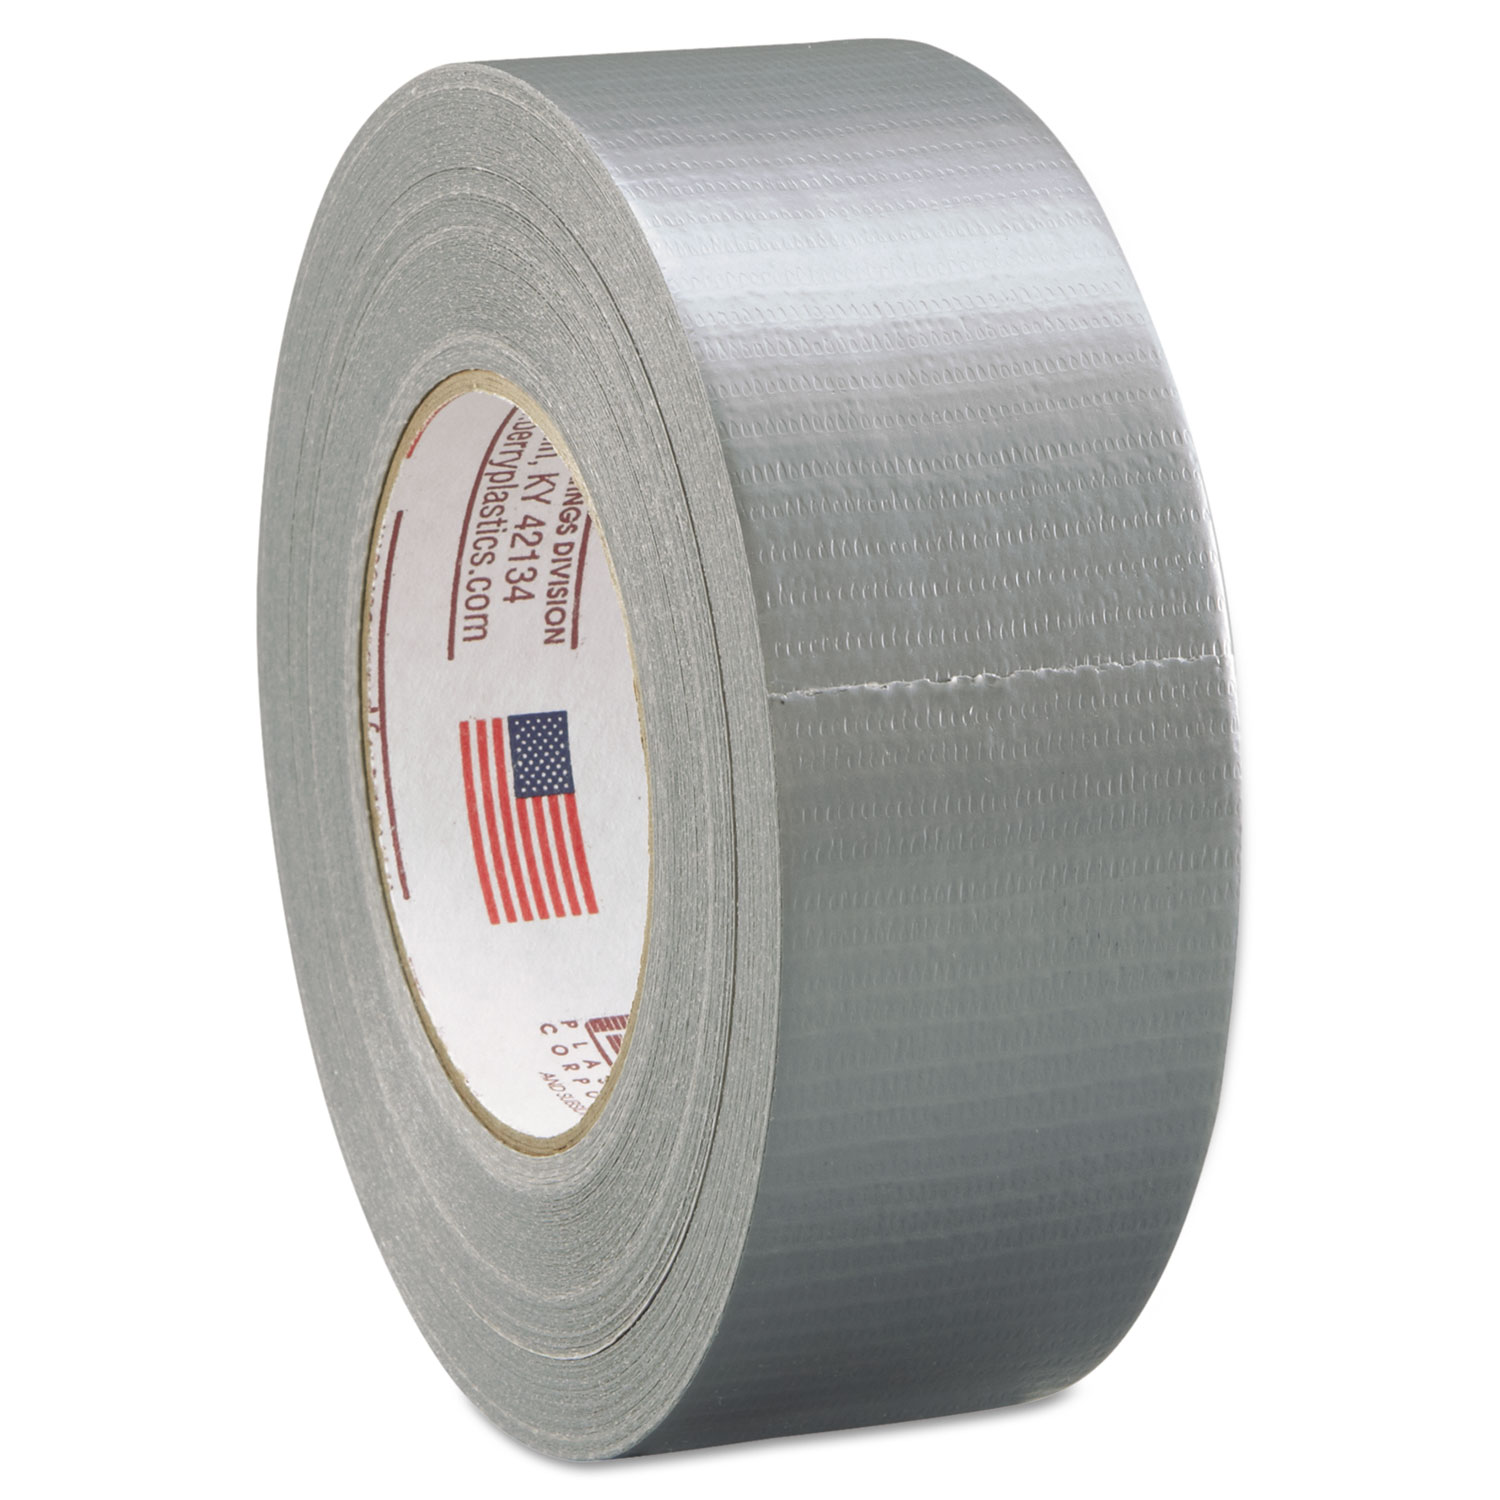  Nashua Tape Products 1086769 394-2 Premium Multi-Purpose Duct Tape, 2 x 60 yds, Silver (BER3940020000) 